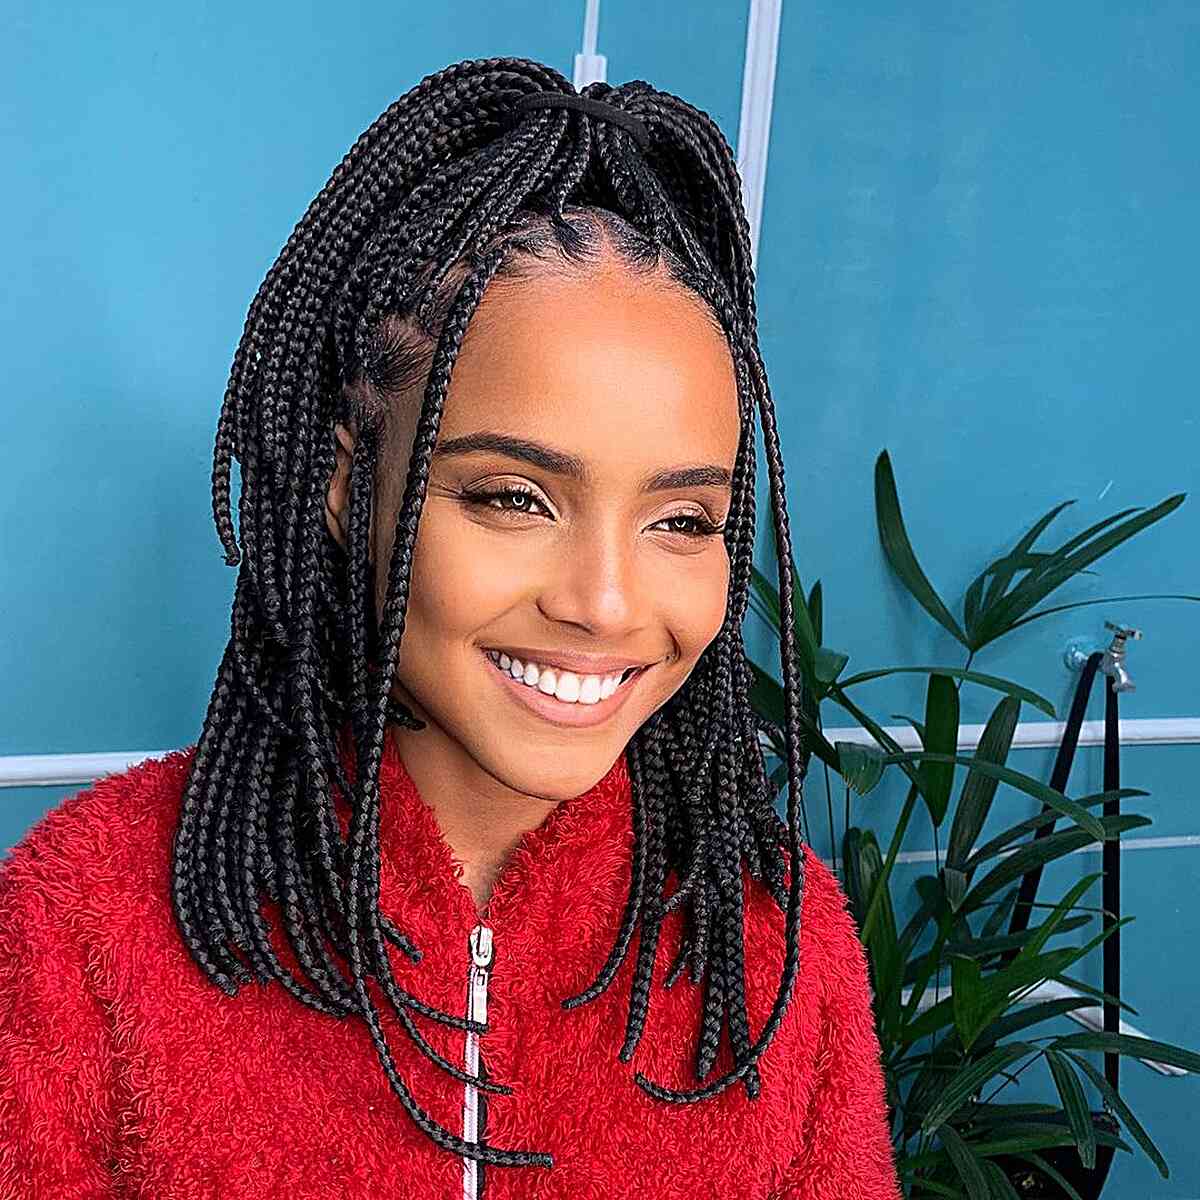 Knotless Box Braids with a High Pony